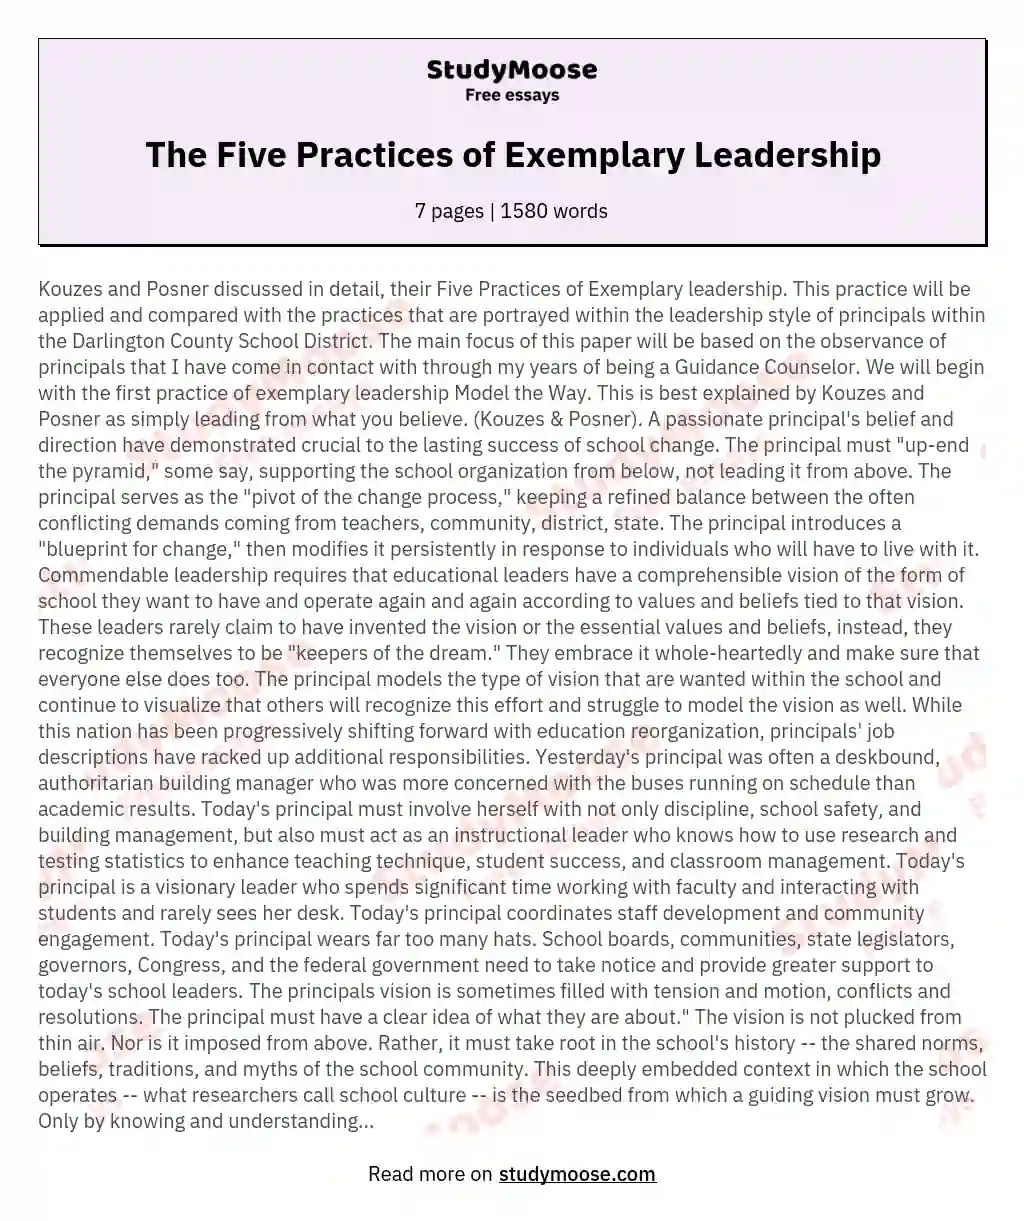 The Five Practices of Exemplary Leadership essay